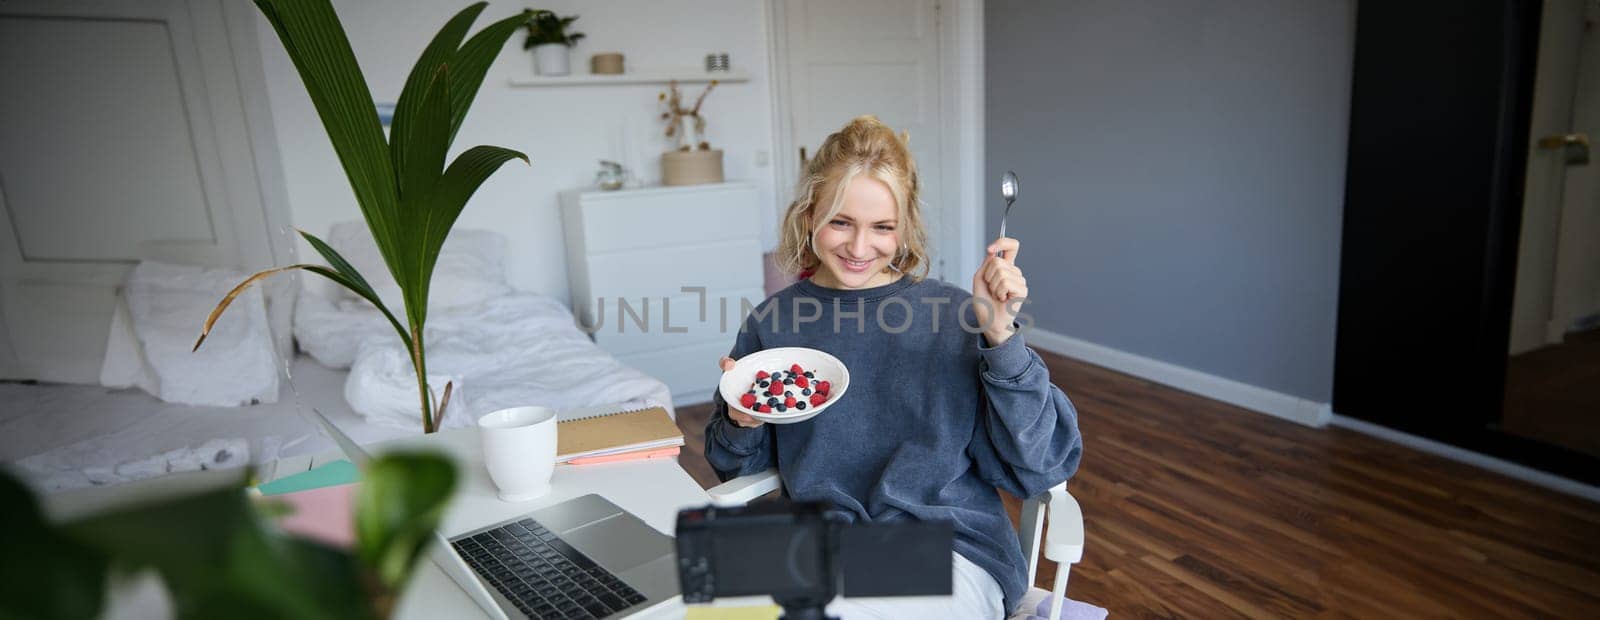 Portrait of cute young girl vlogger, showing her breakfast on camera, recording vlog in her bedroom, holding dessert, eating.